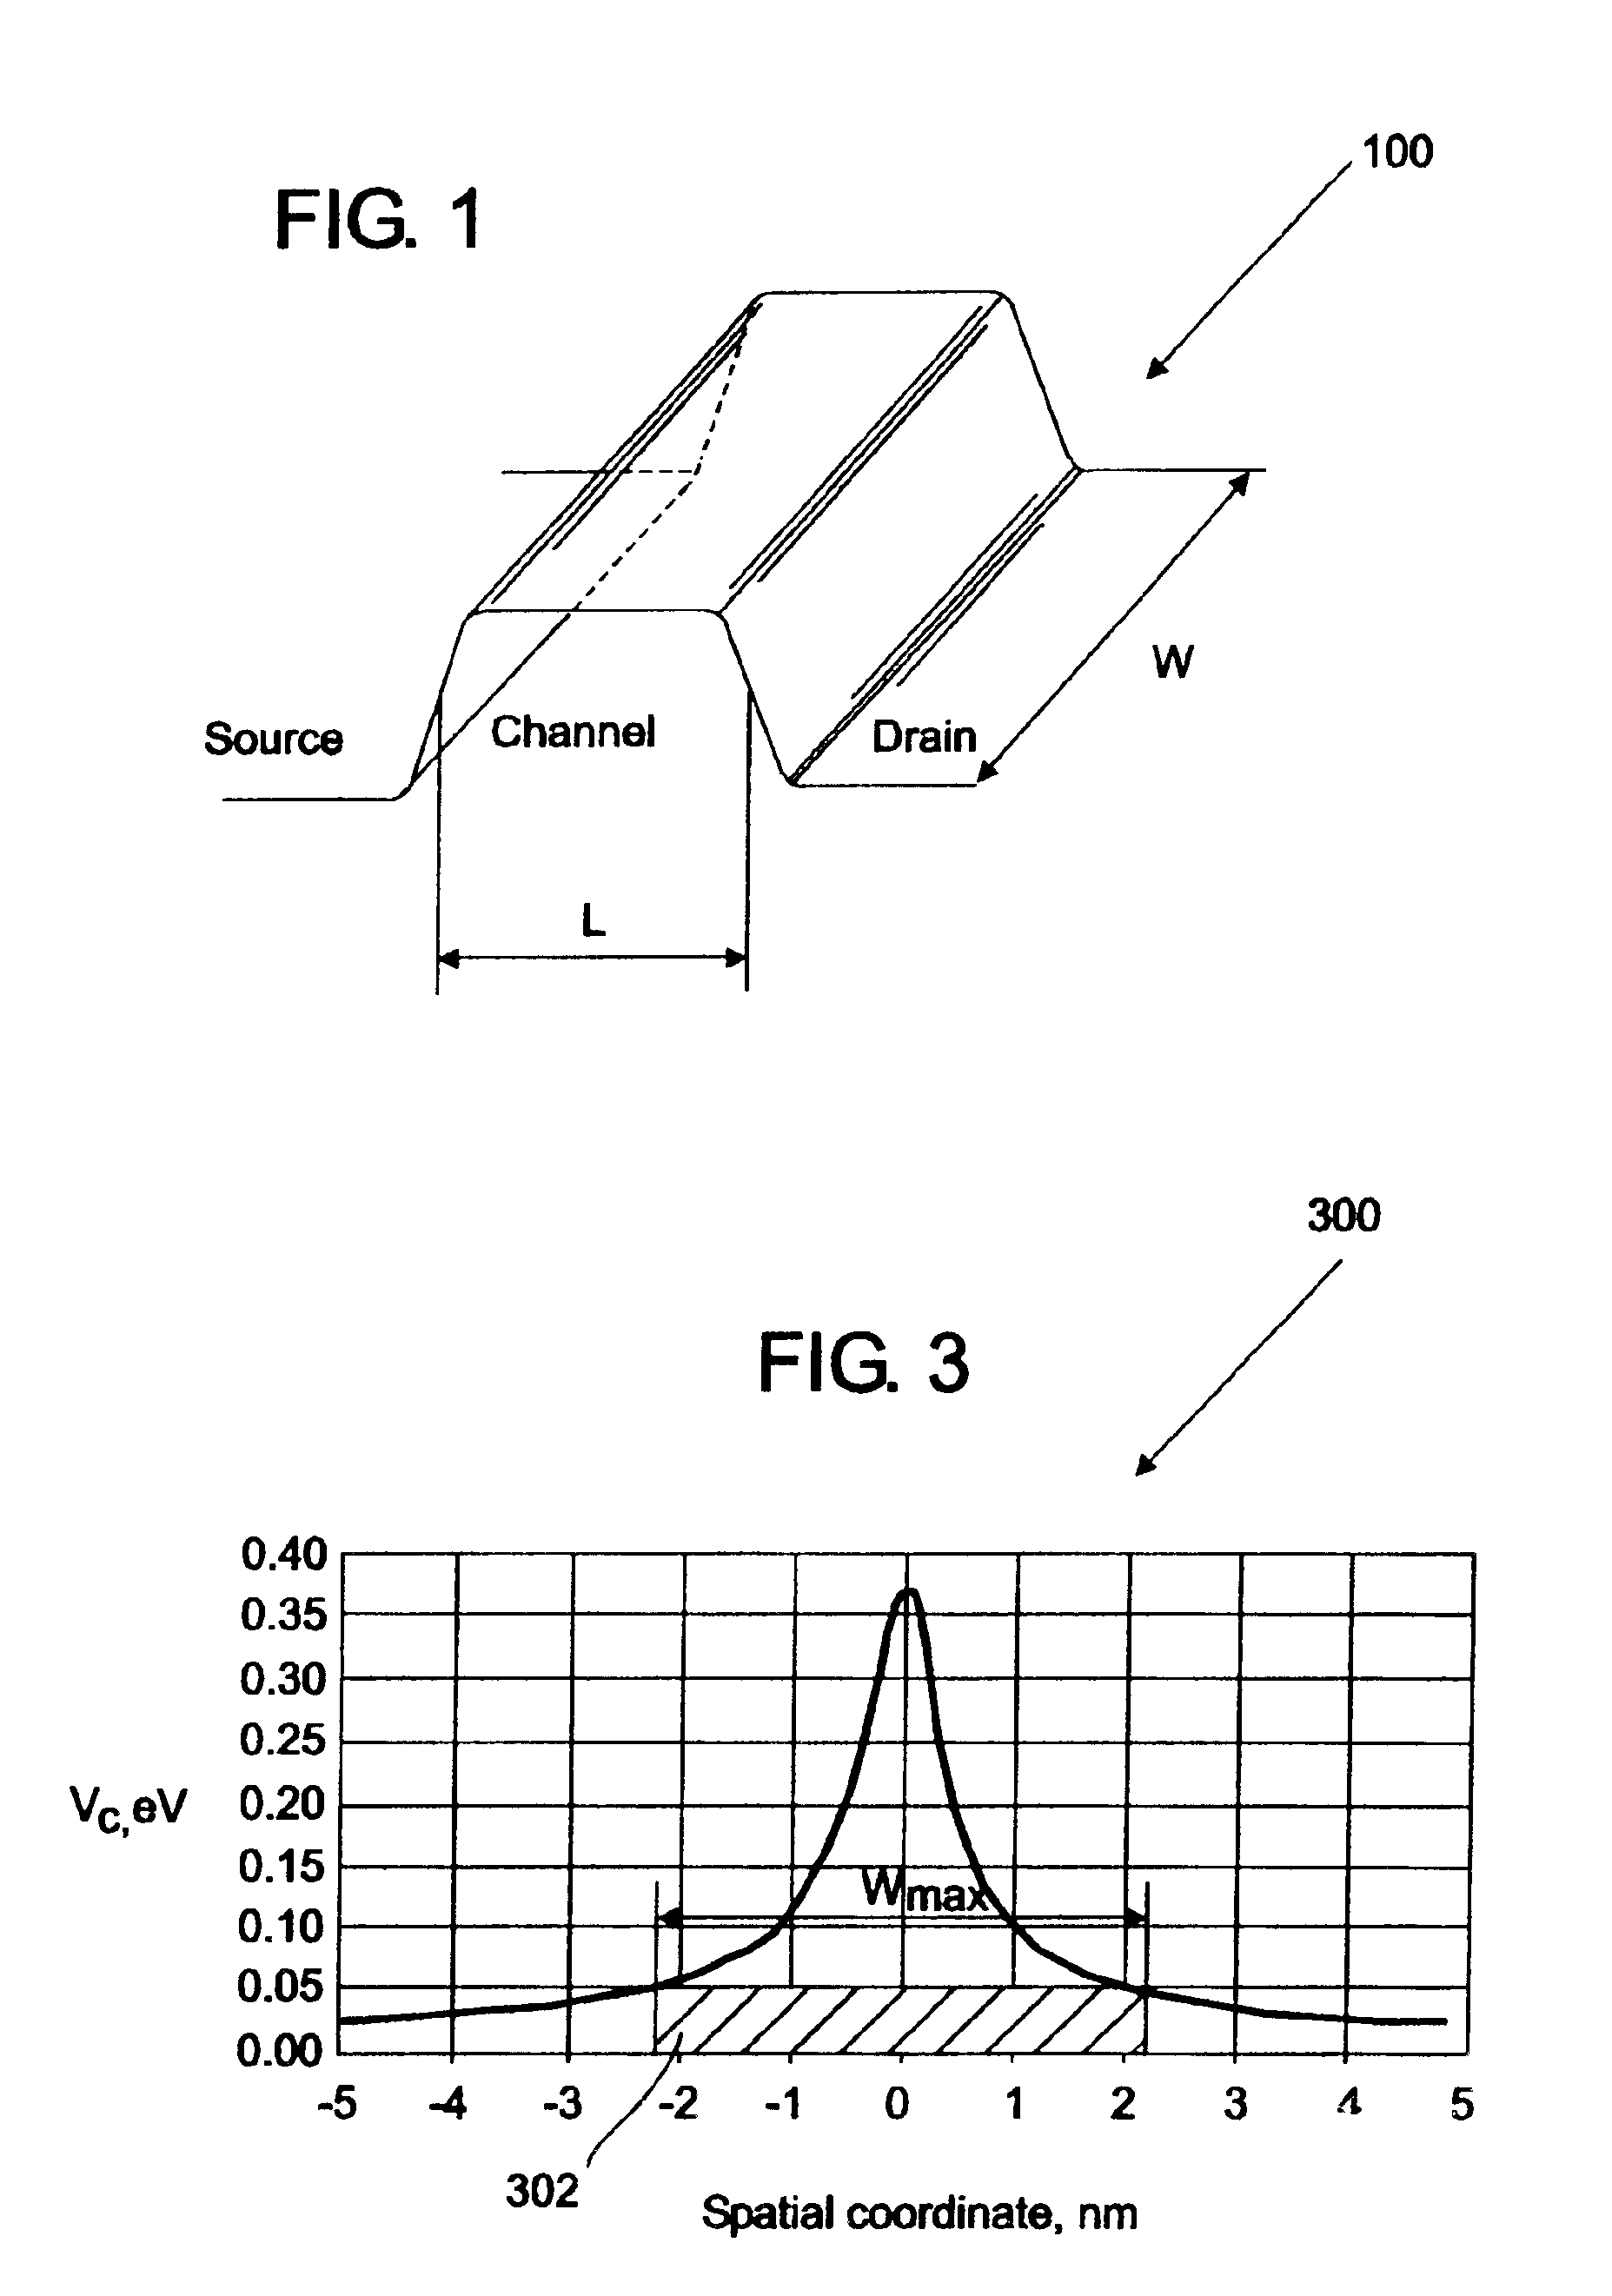 Deterministically doped field-effect devices and methods of making same